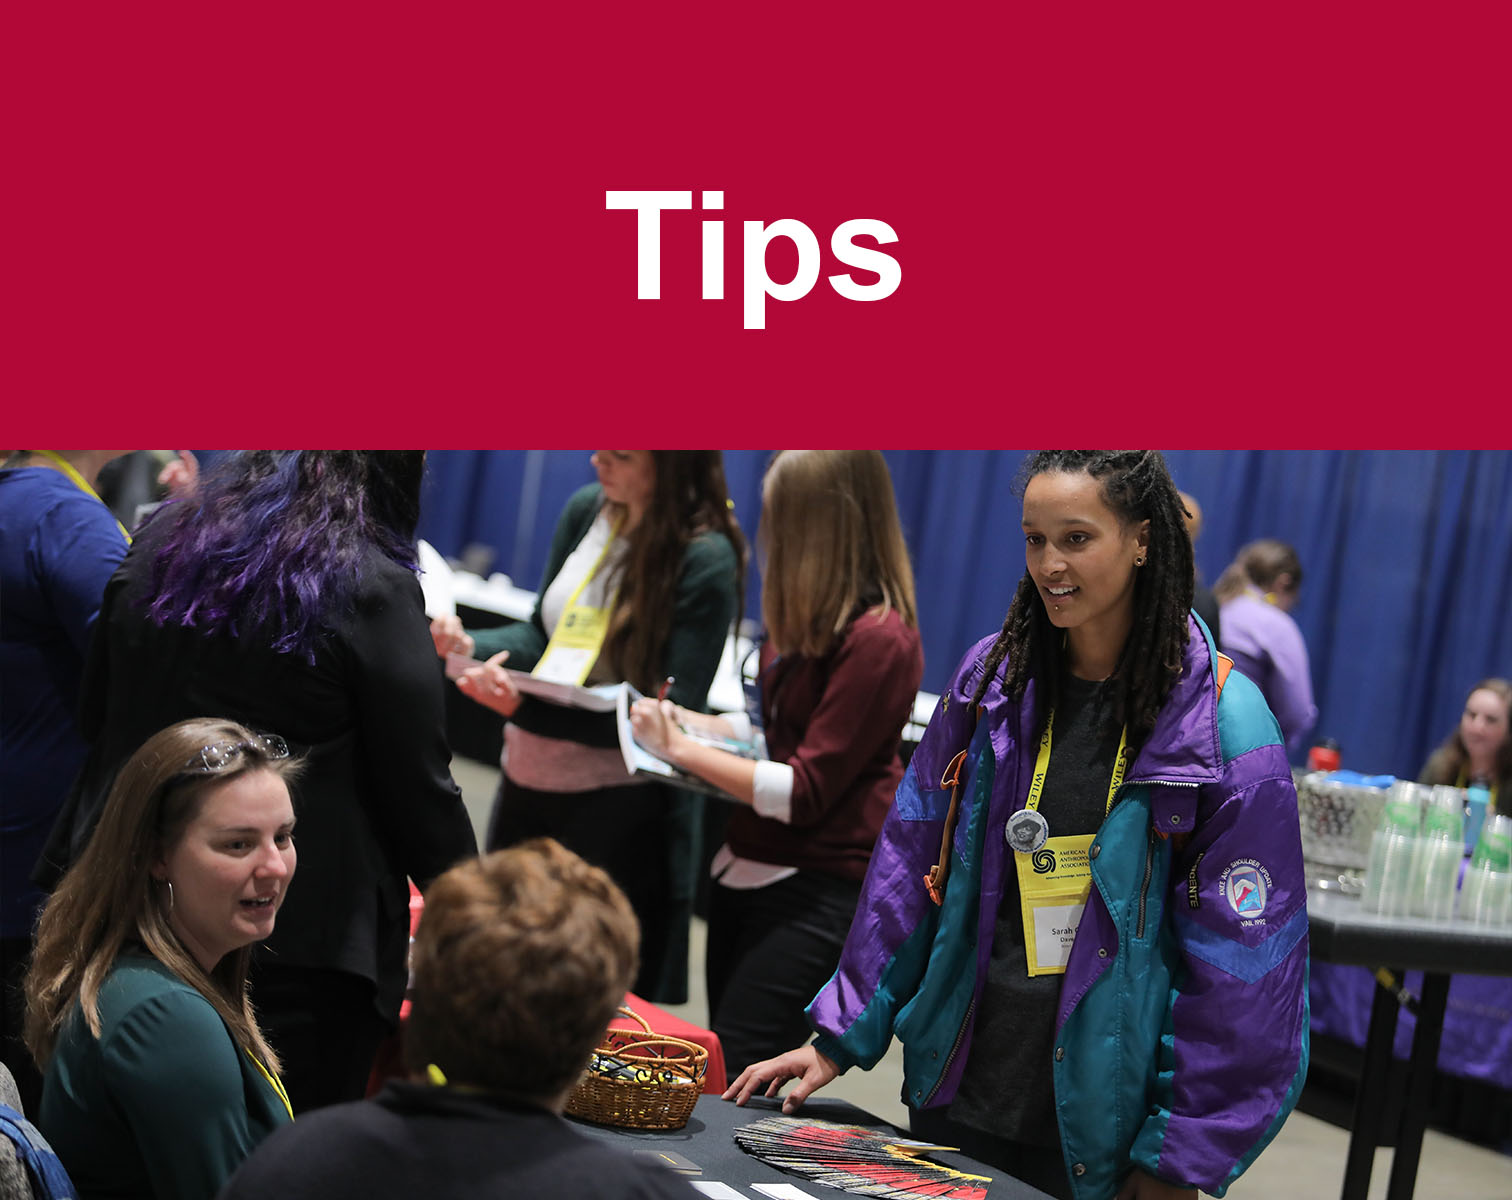 Tips for Membership referral program with an image of people talking in an exhibit hall